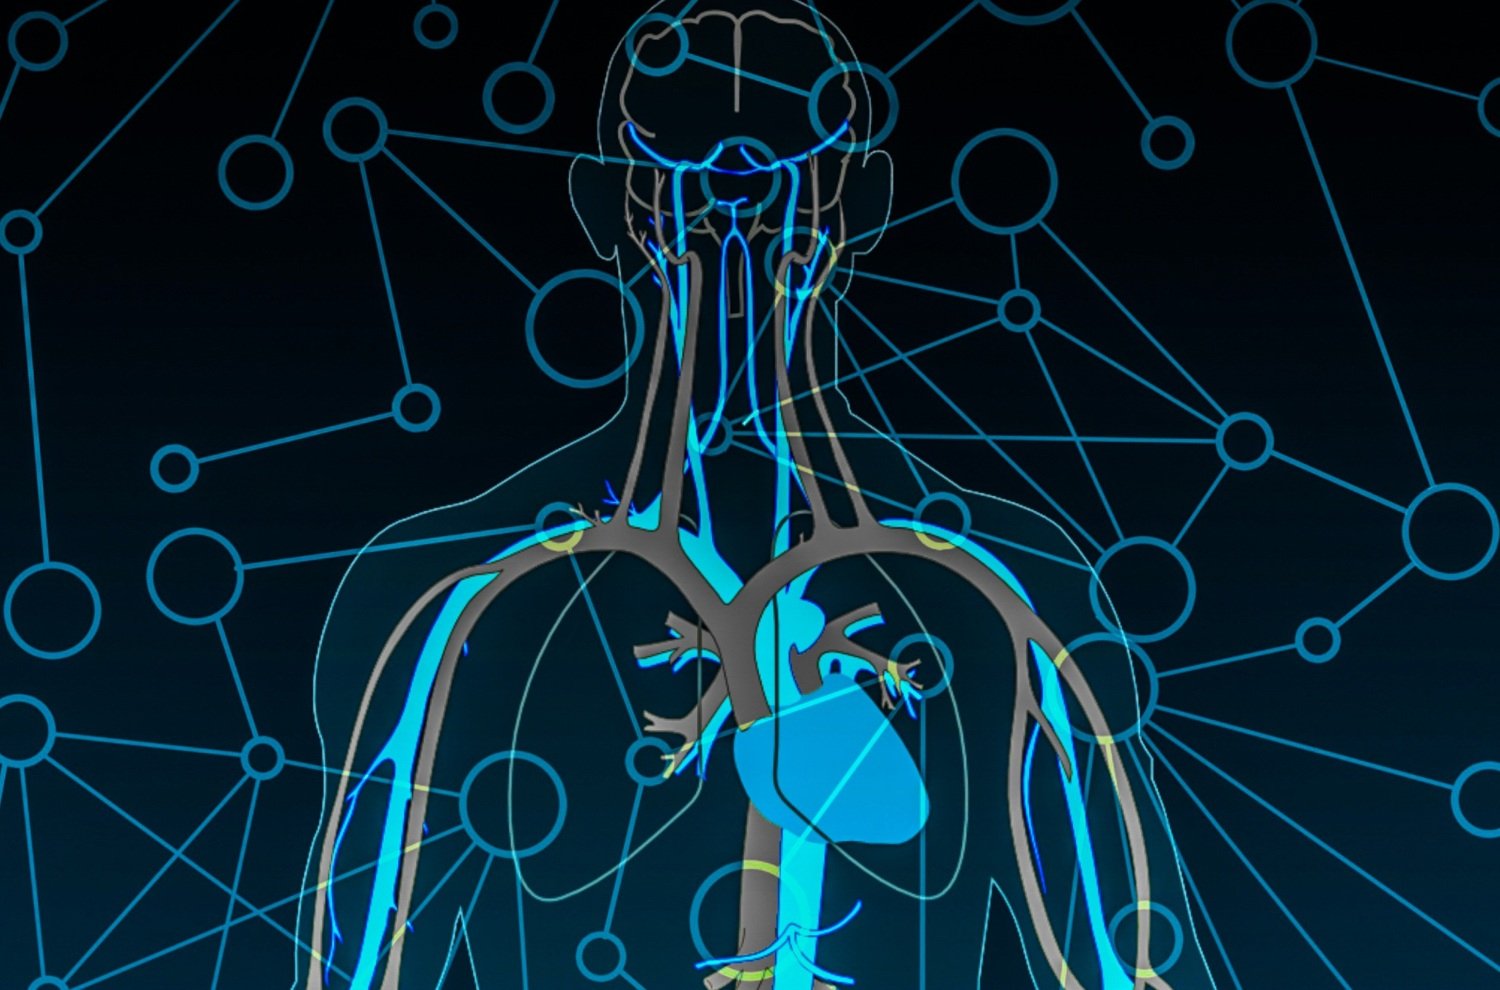 Illustration of circulatory system in human body, as a network.